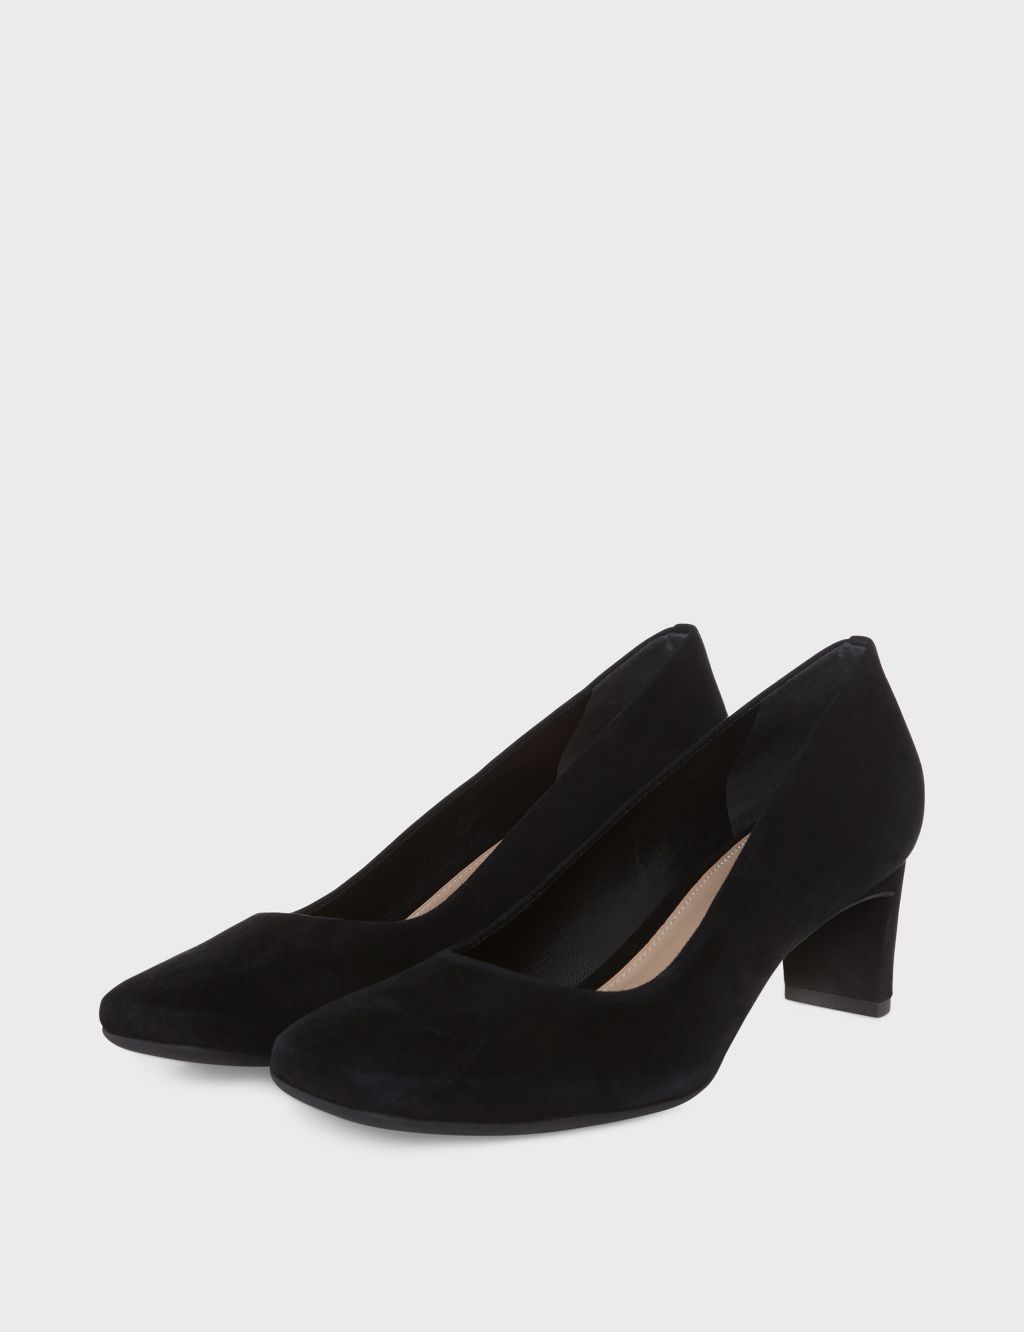 Suede Block Heel Square Toe Court Shoes image 2